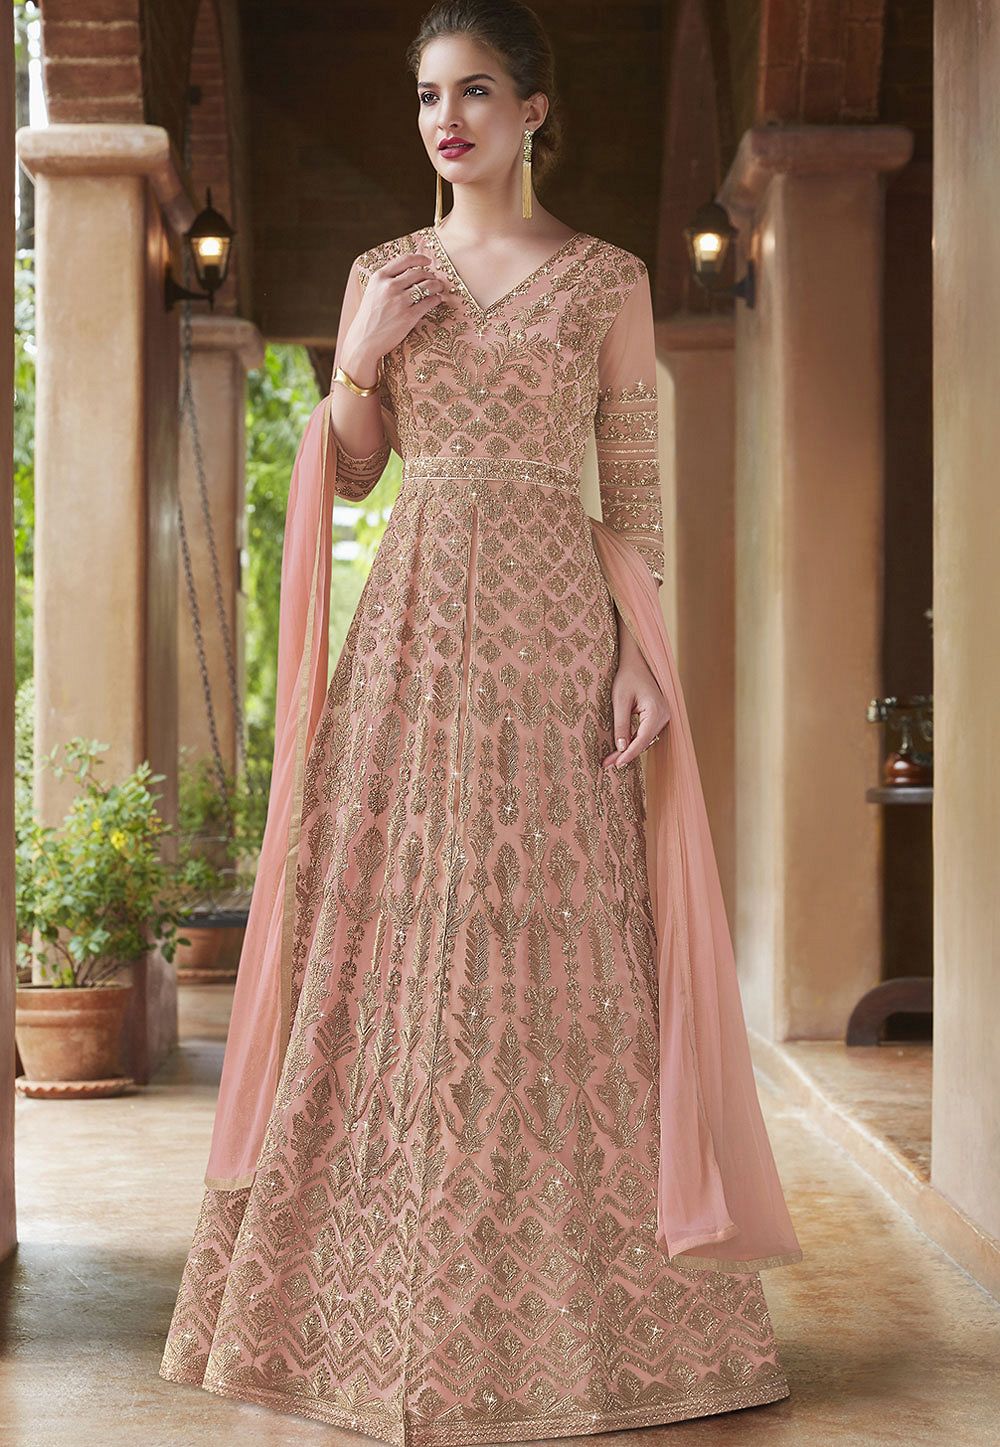 Light Pink Georgette 3 Piece Dress With Embroidery Work Indian Designer  Suit in USA, UK, Malaysia, South Africa, Dubai, Singapore